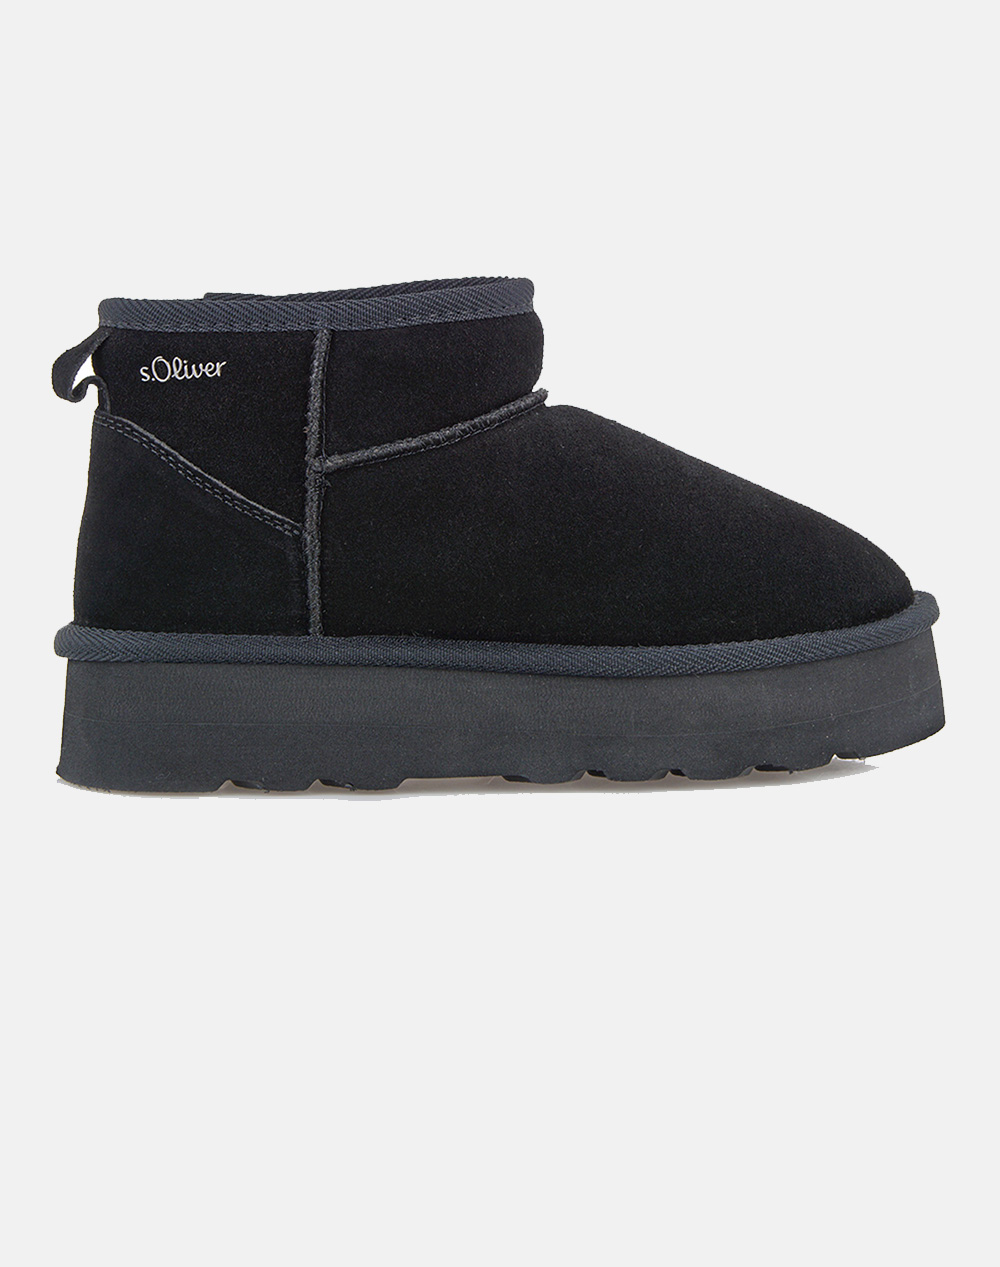 S OLIVER SNOW BOOTS